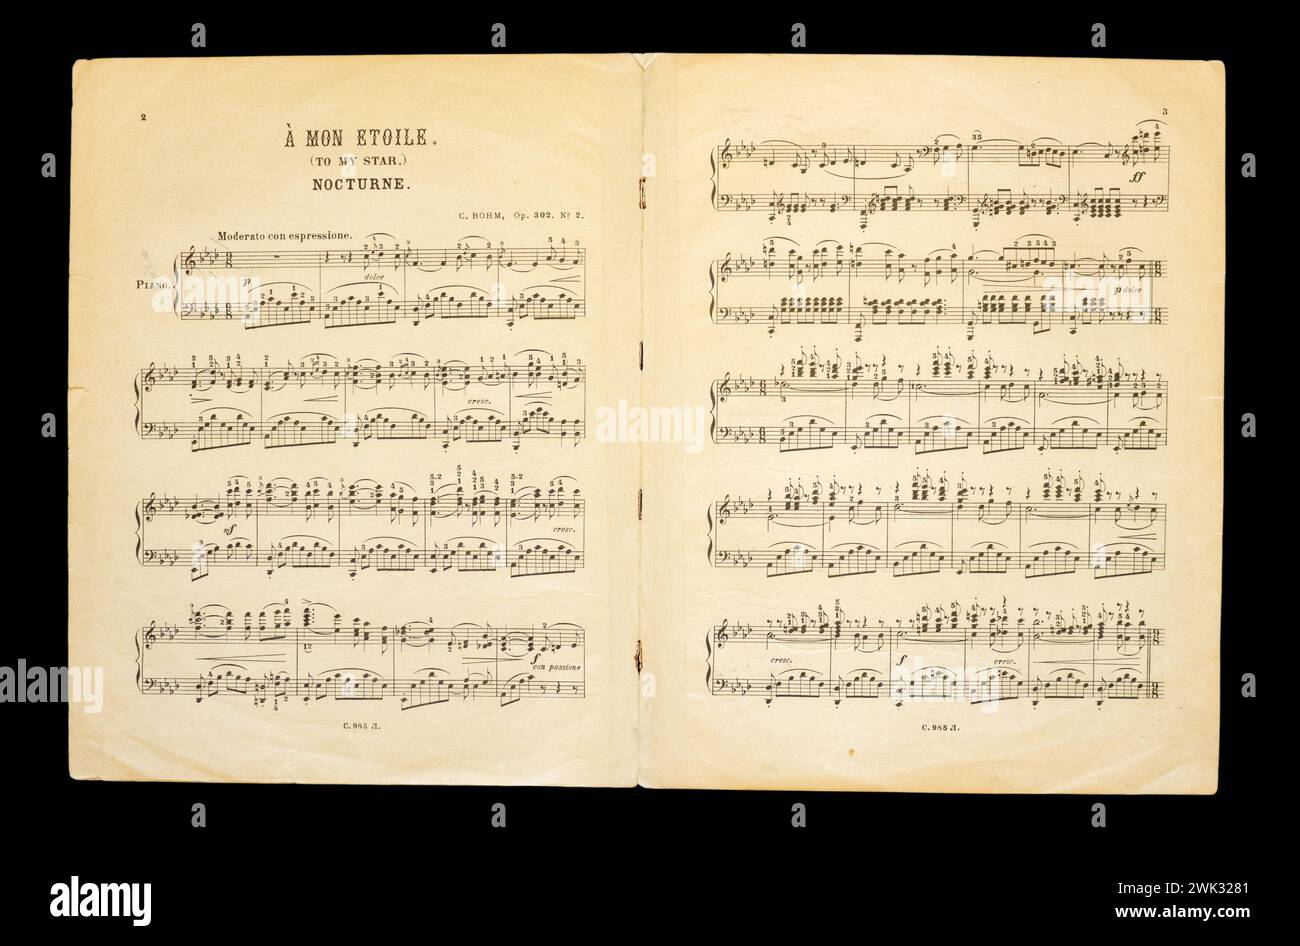 Sheet music 'A Mon Etoile' (To My Star) Nocturne by composer Carl Bohm. Stock Photo